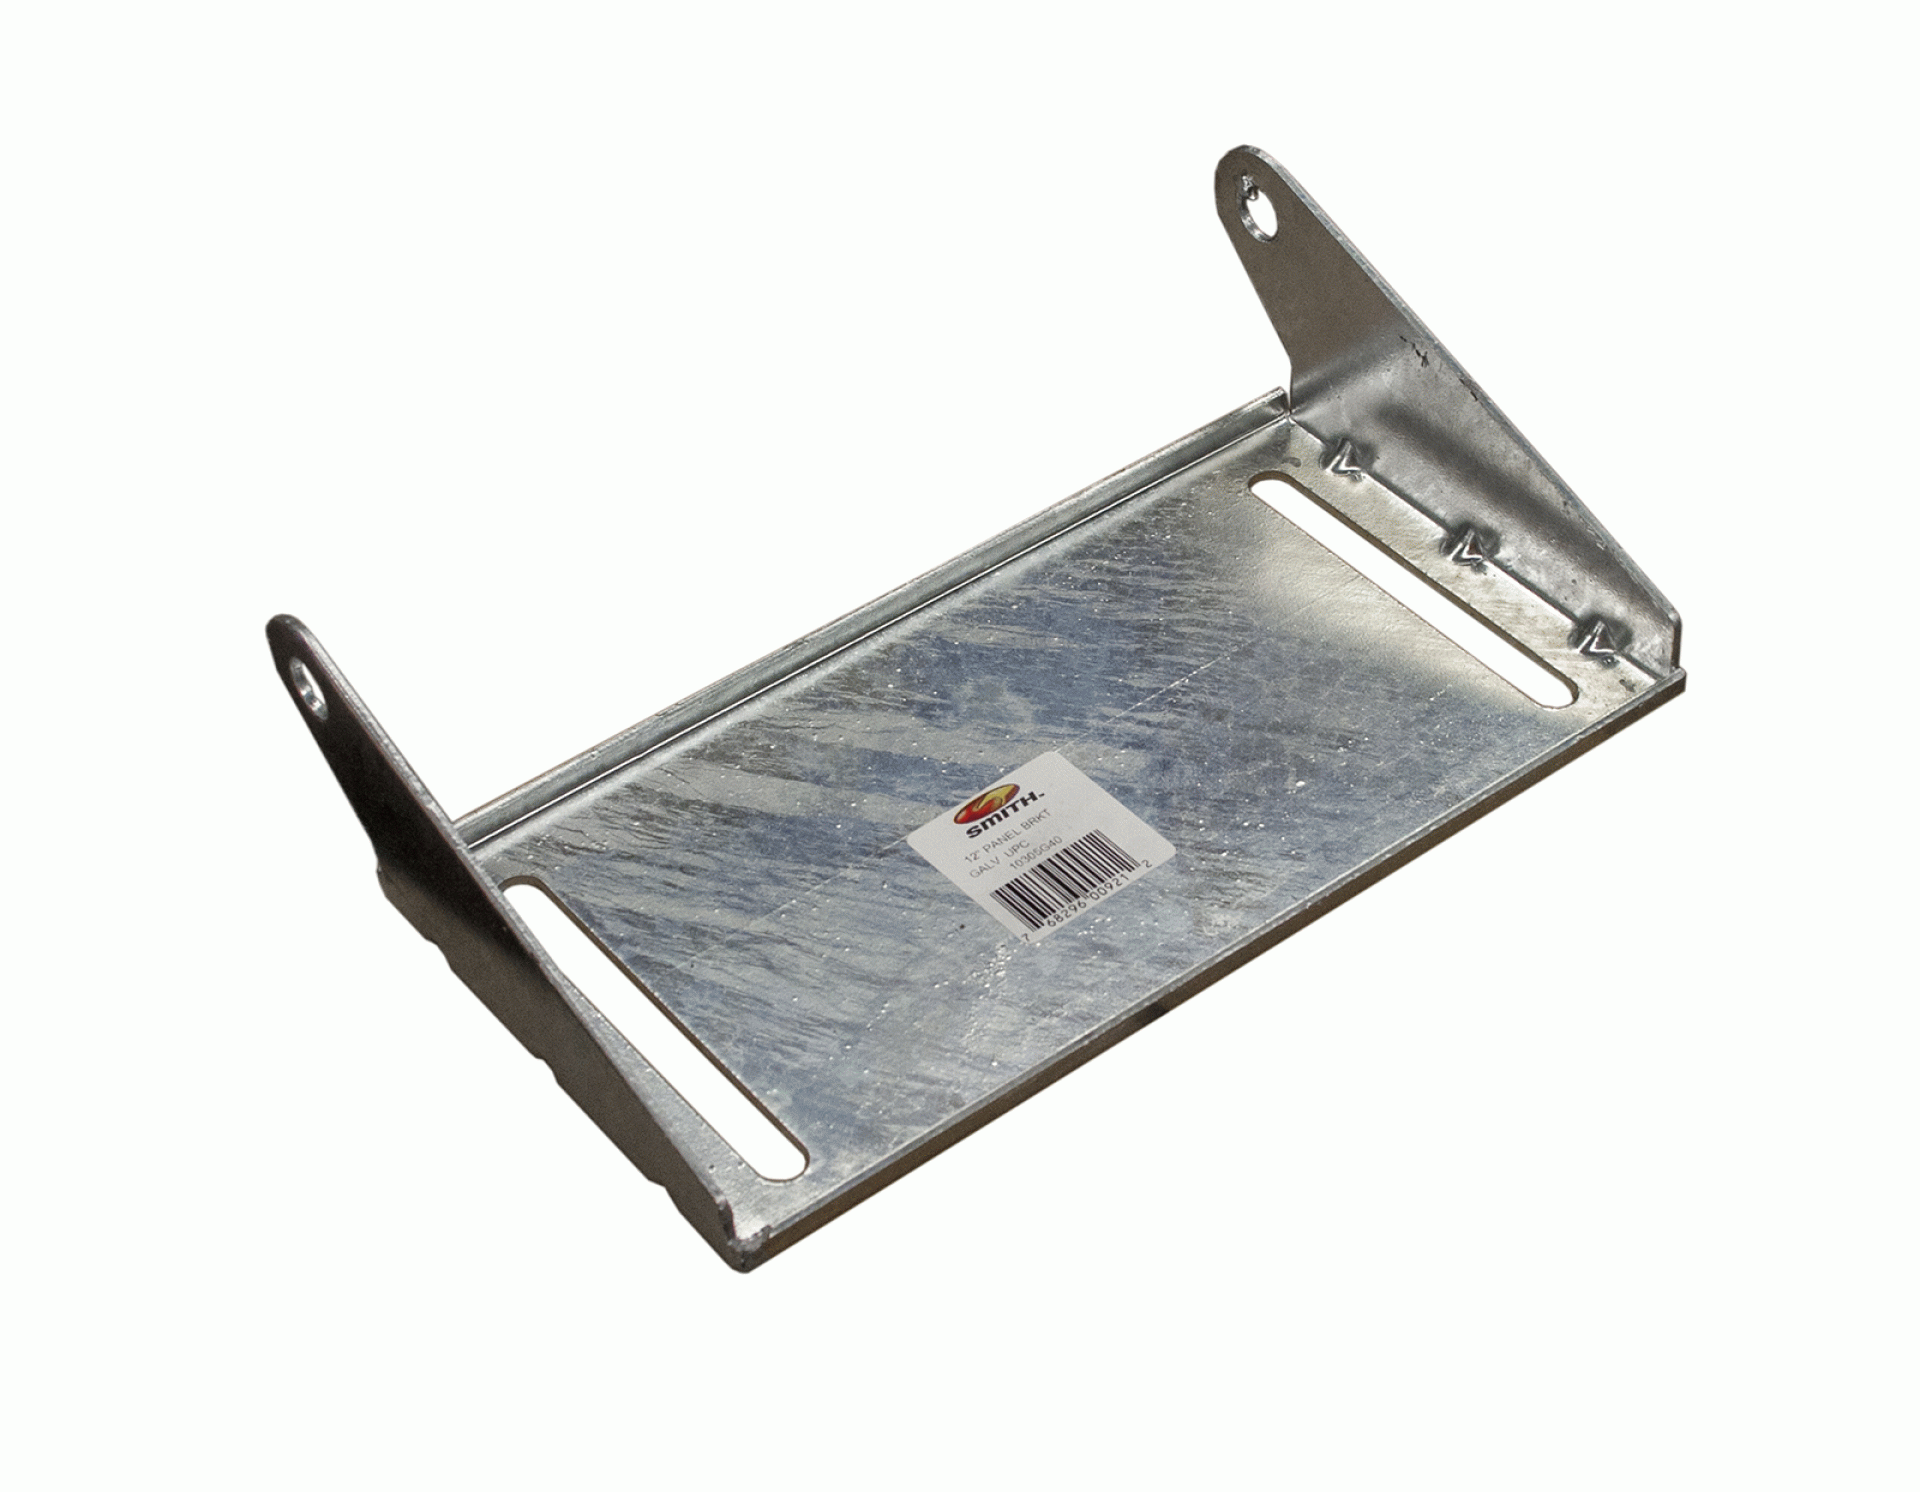 C. E. SMITH CO. INC | 10305G40 | PANEL BRACKET - DESIGNED FOR 12" ROLLERS